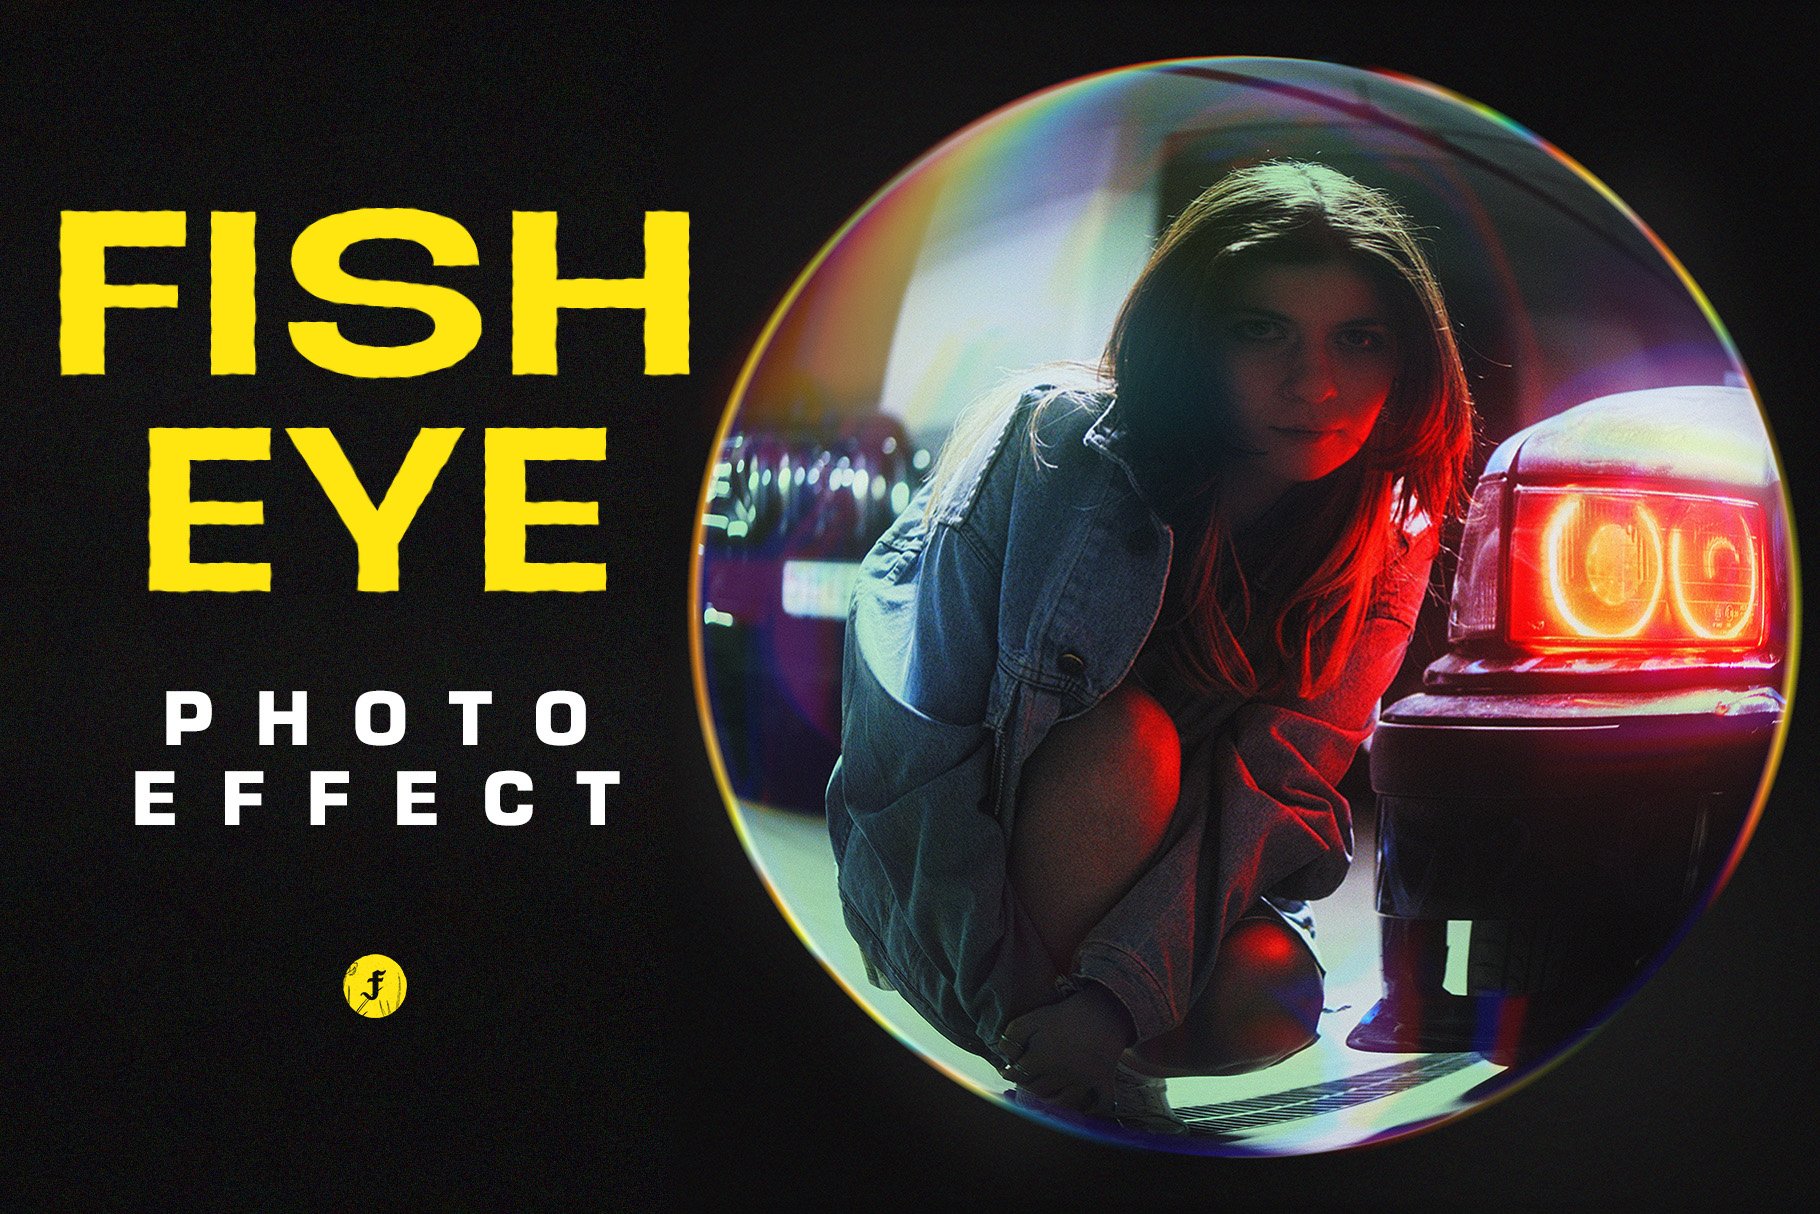 The fisheye effect will fit perfectly into modern realities.